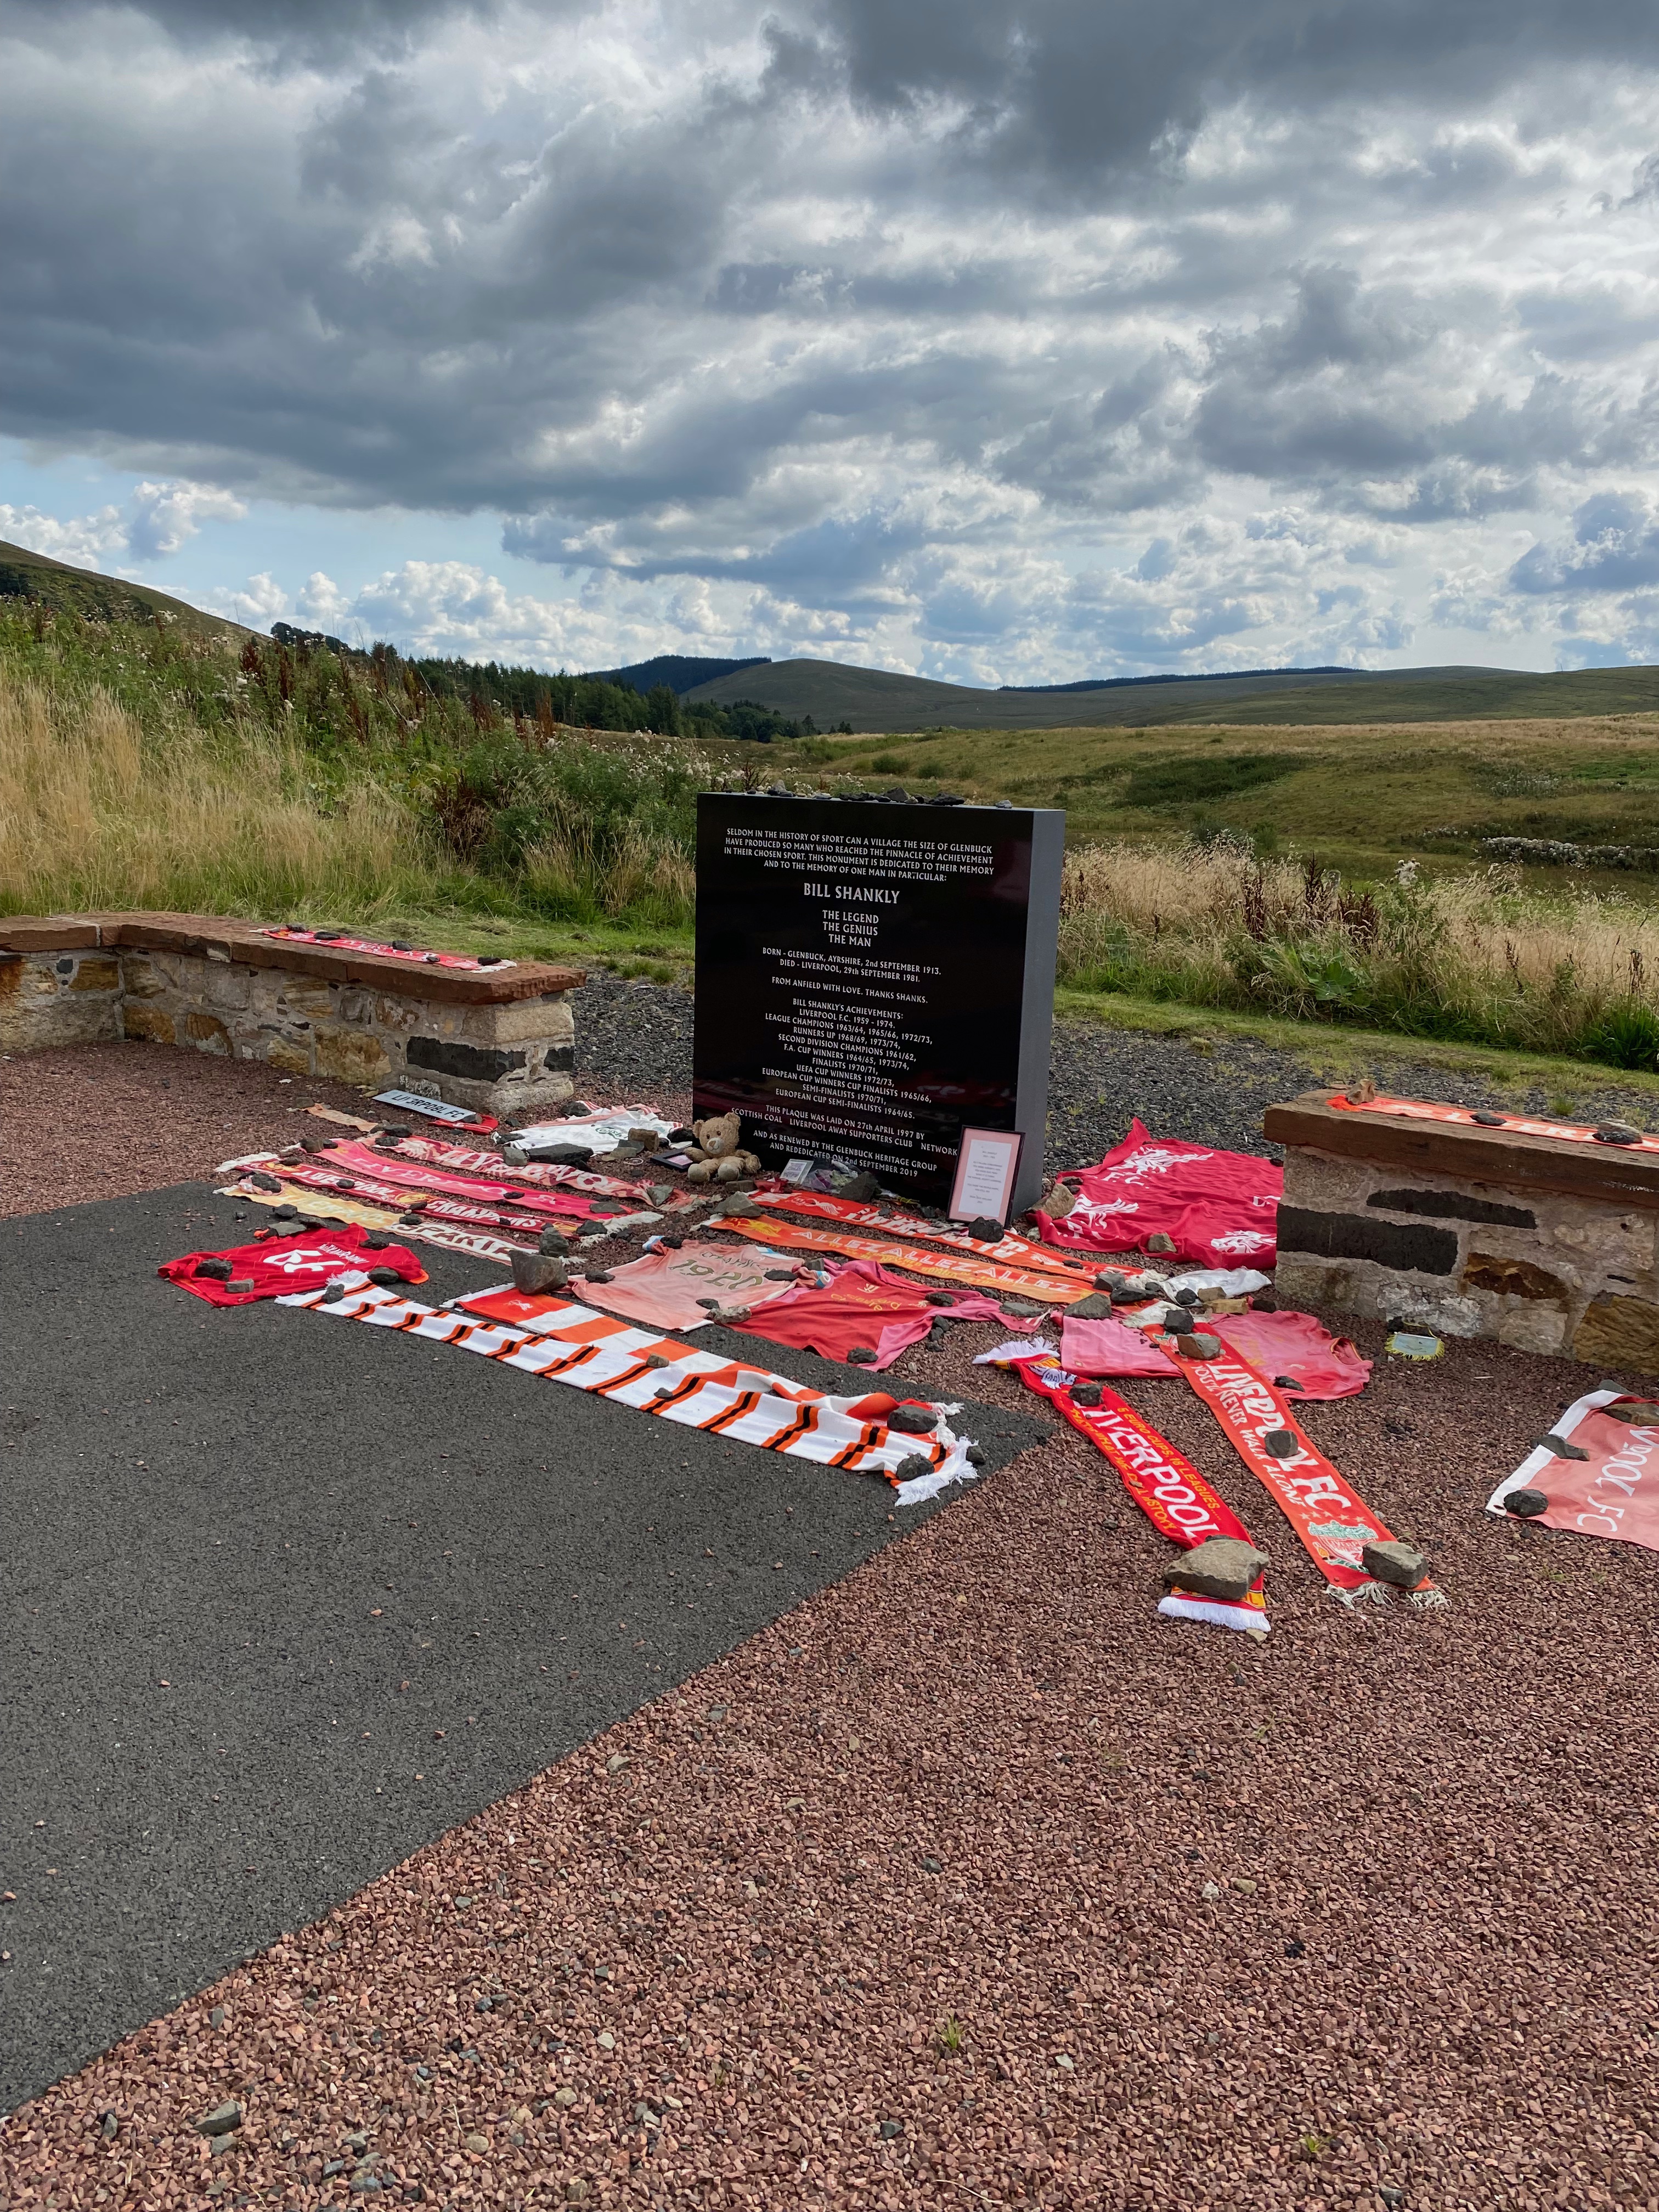 Black memorial stone surrounded by red and white scarves of Liverpool football club. Hills and a cloudy sky in the background